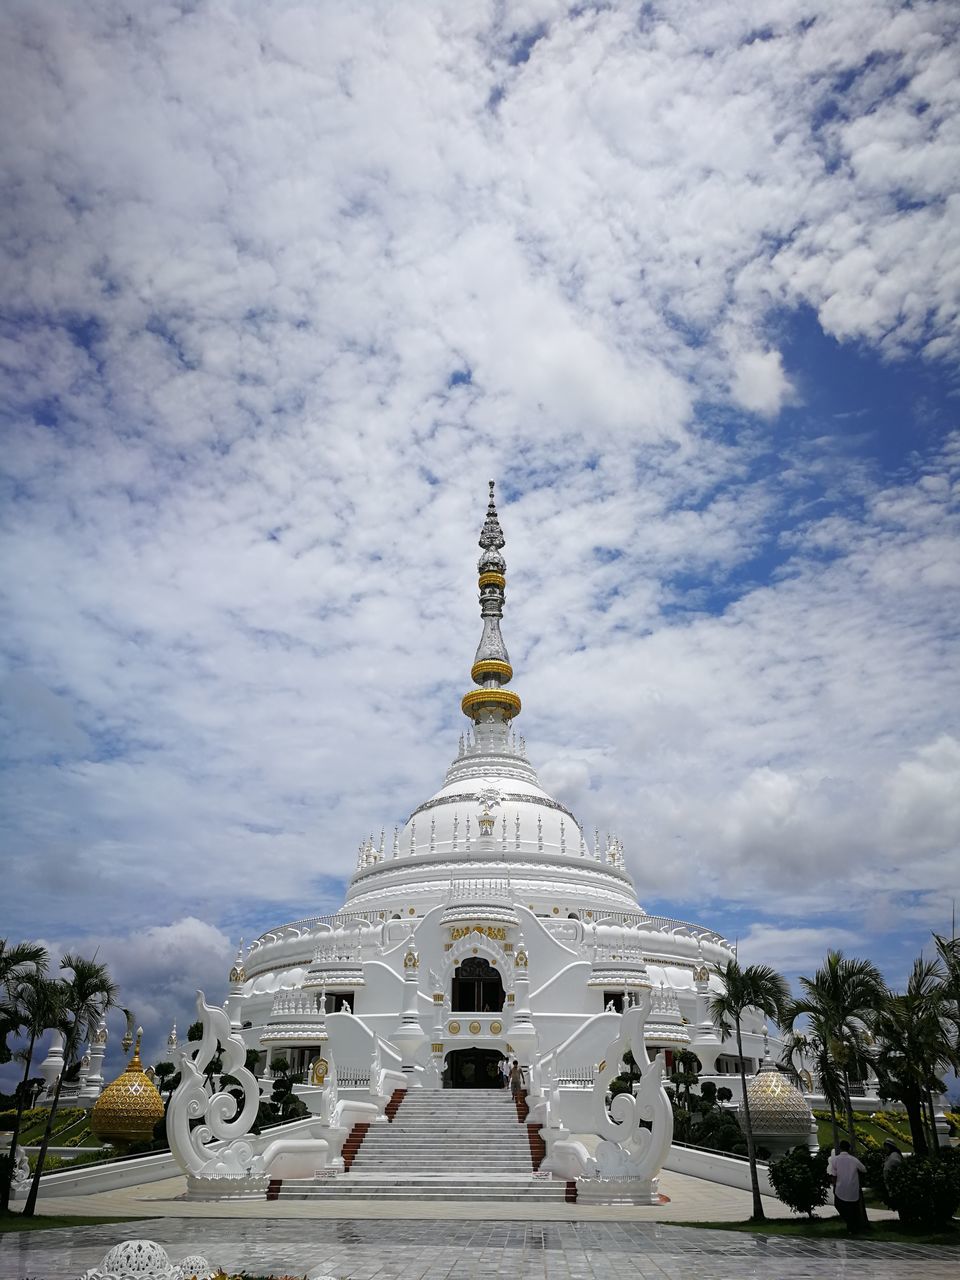 architecture, religion, sky, belief, built structure, cloud, spirituality, travel destinations, landmark, temple - building, building exterior, place of worship, travel, nature, building, history, the past, tourism, tower, outdoors, day, no people, tree, temple, city, plant, dome